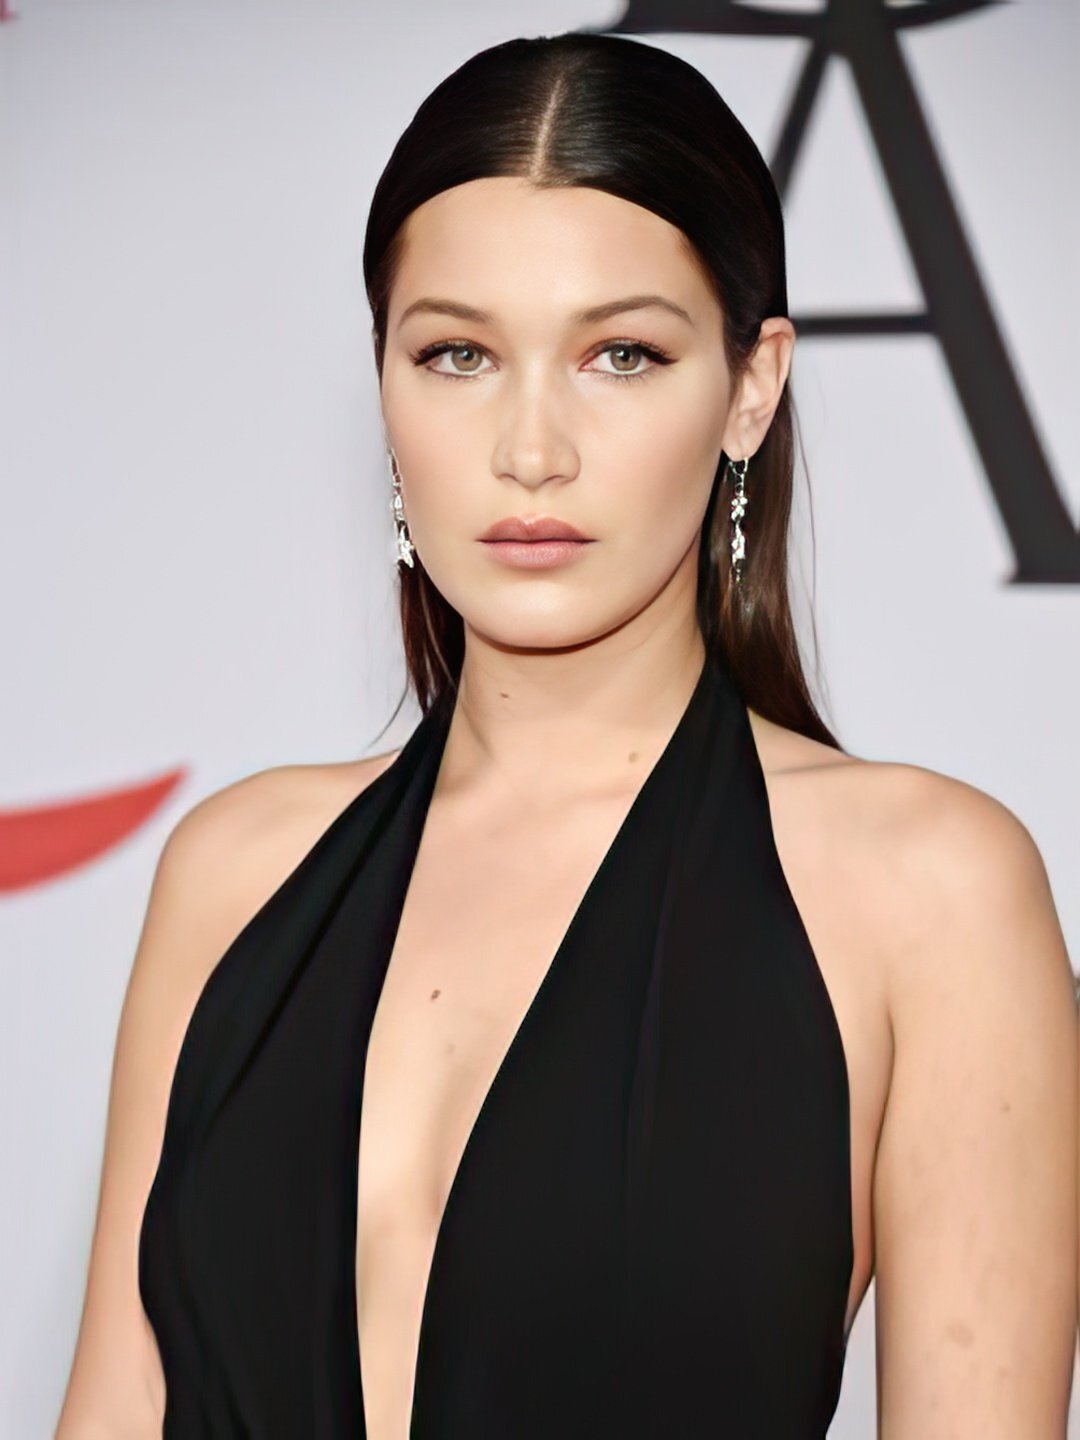 Bella Hadid who is her father